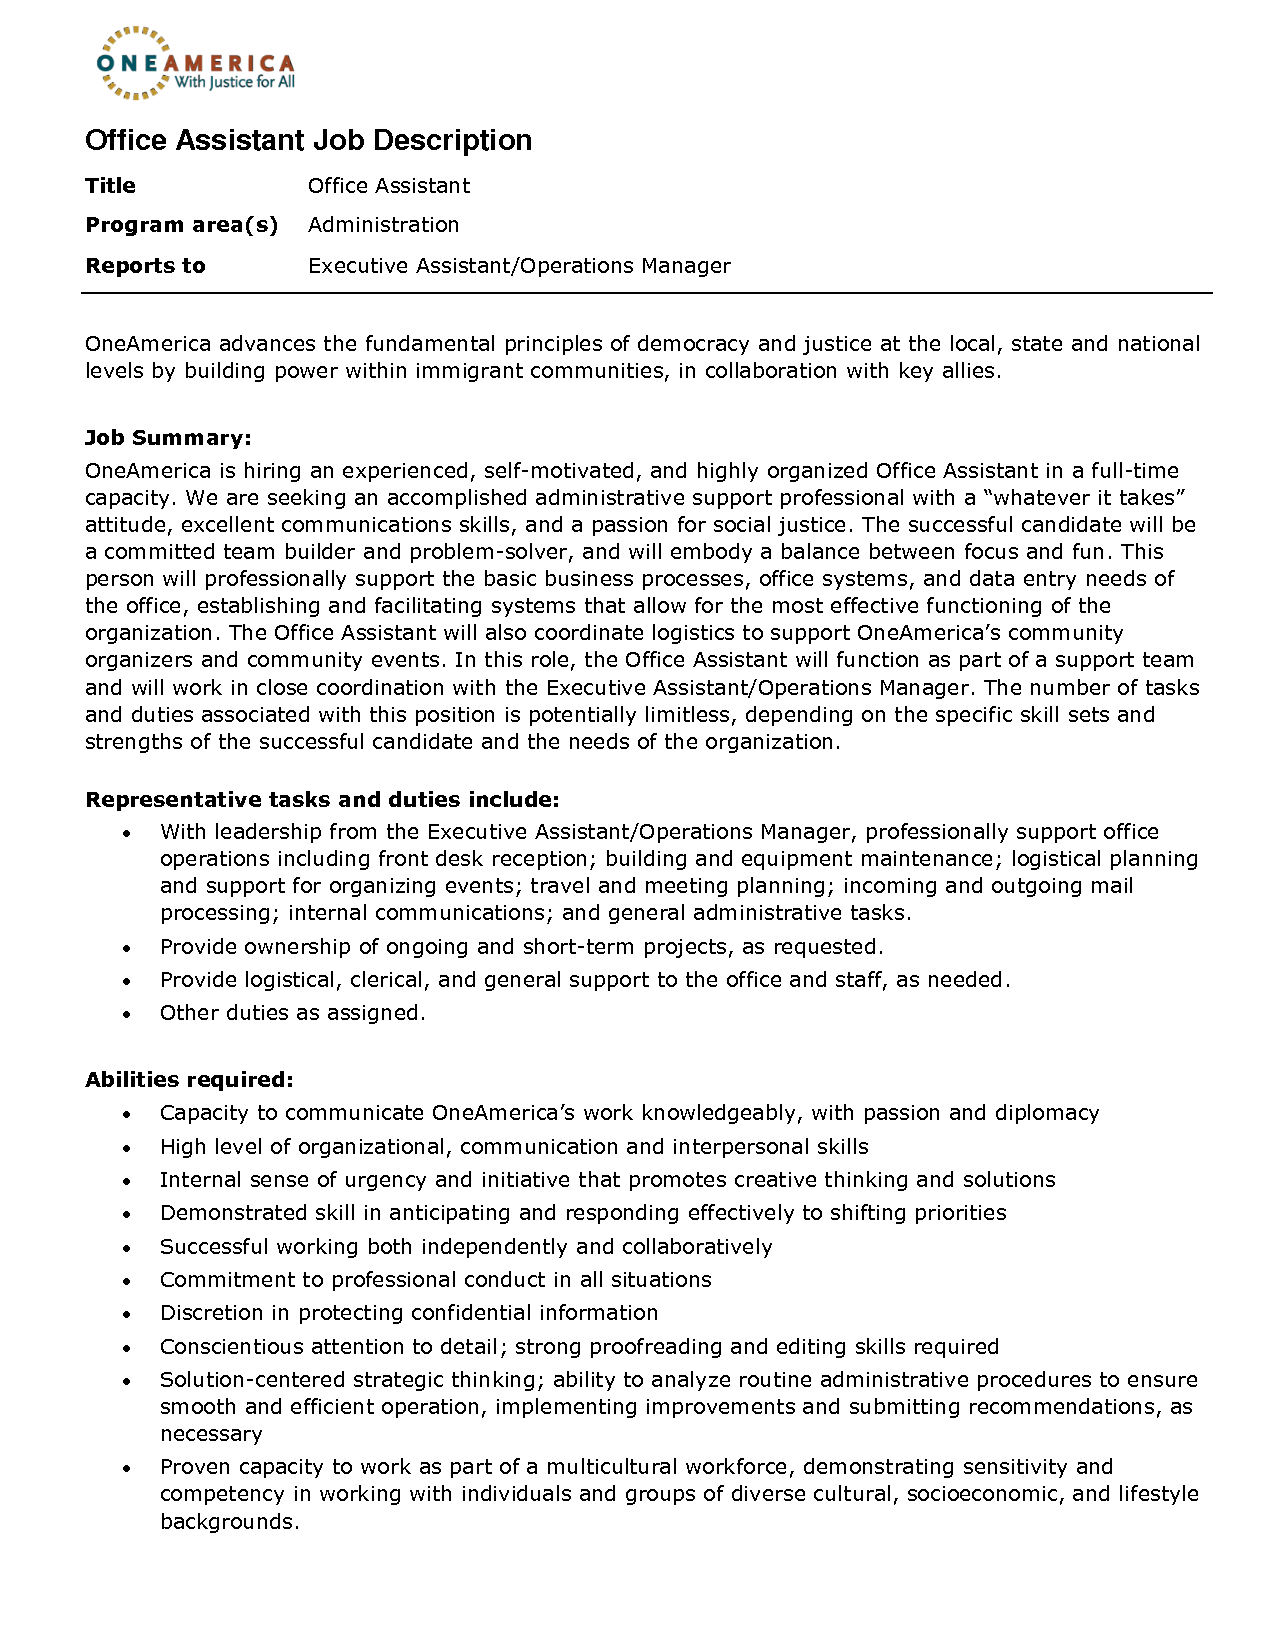 office assistant duties and responsibilities resume fast lunchrock co